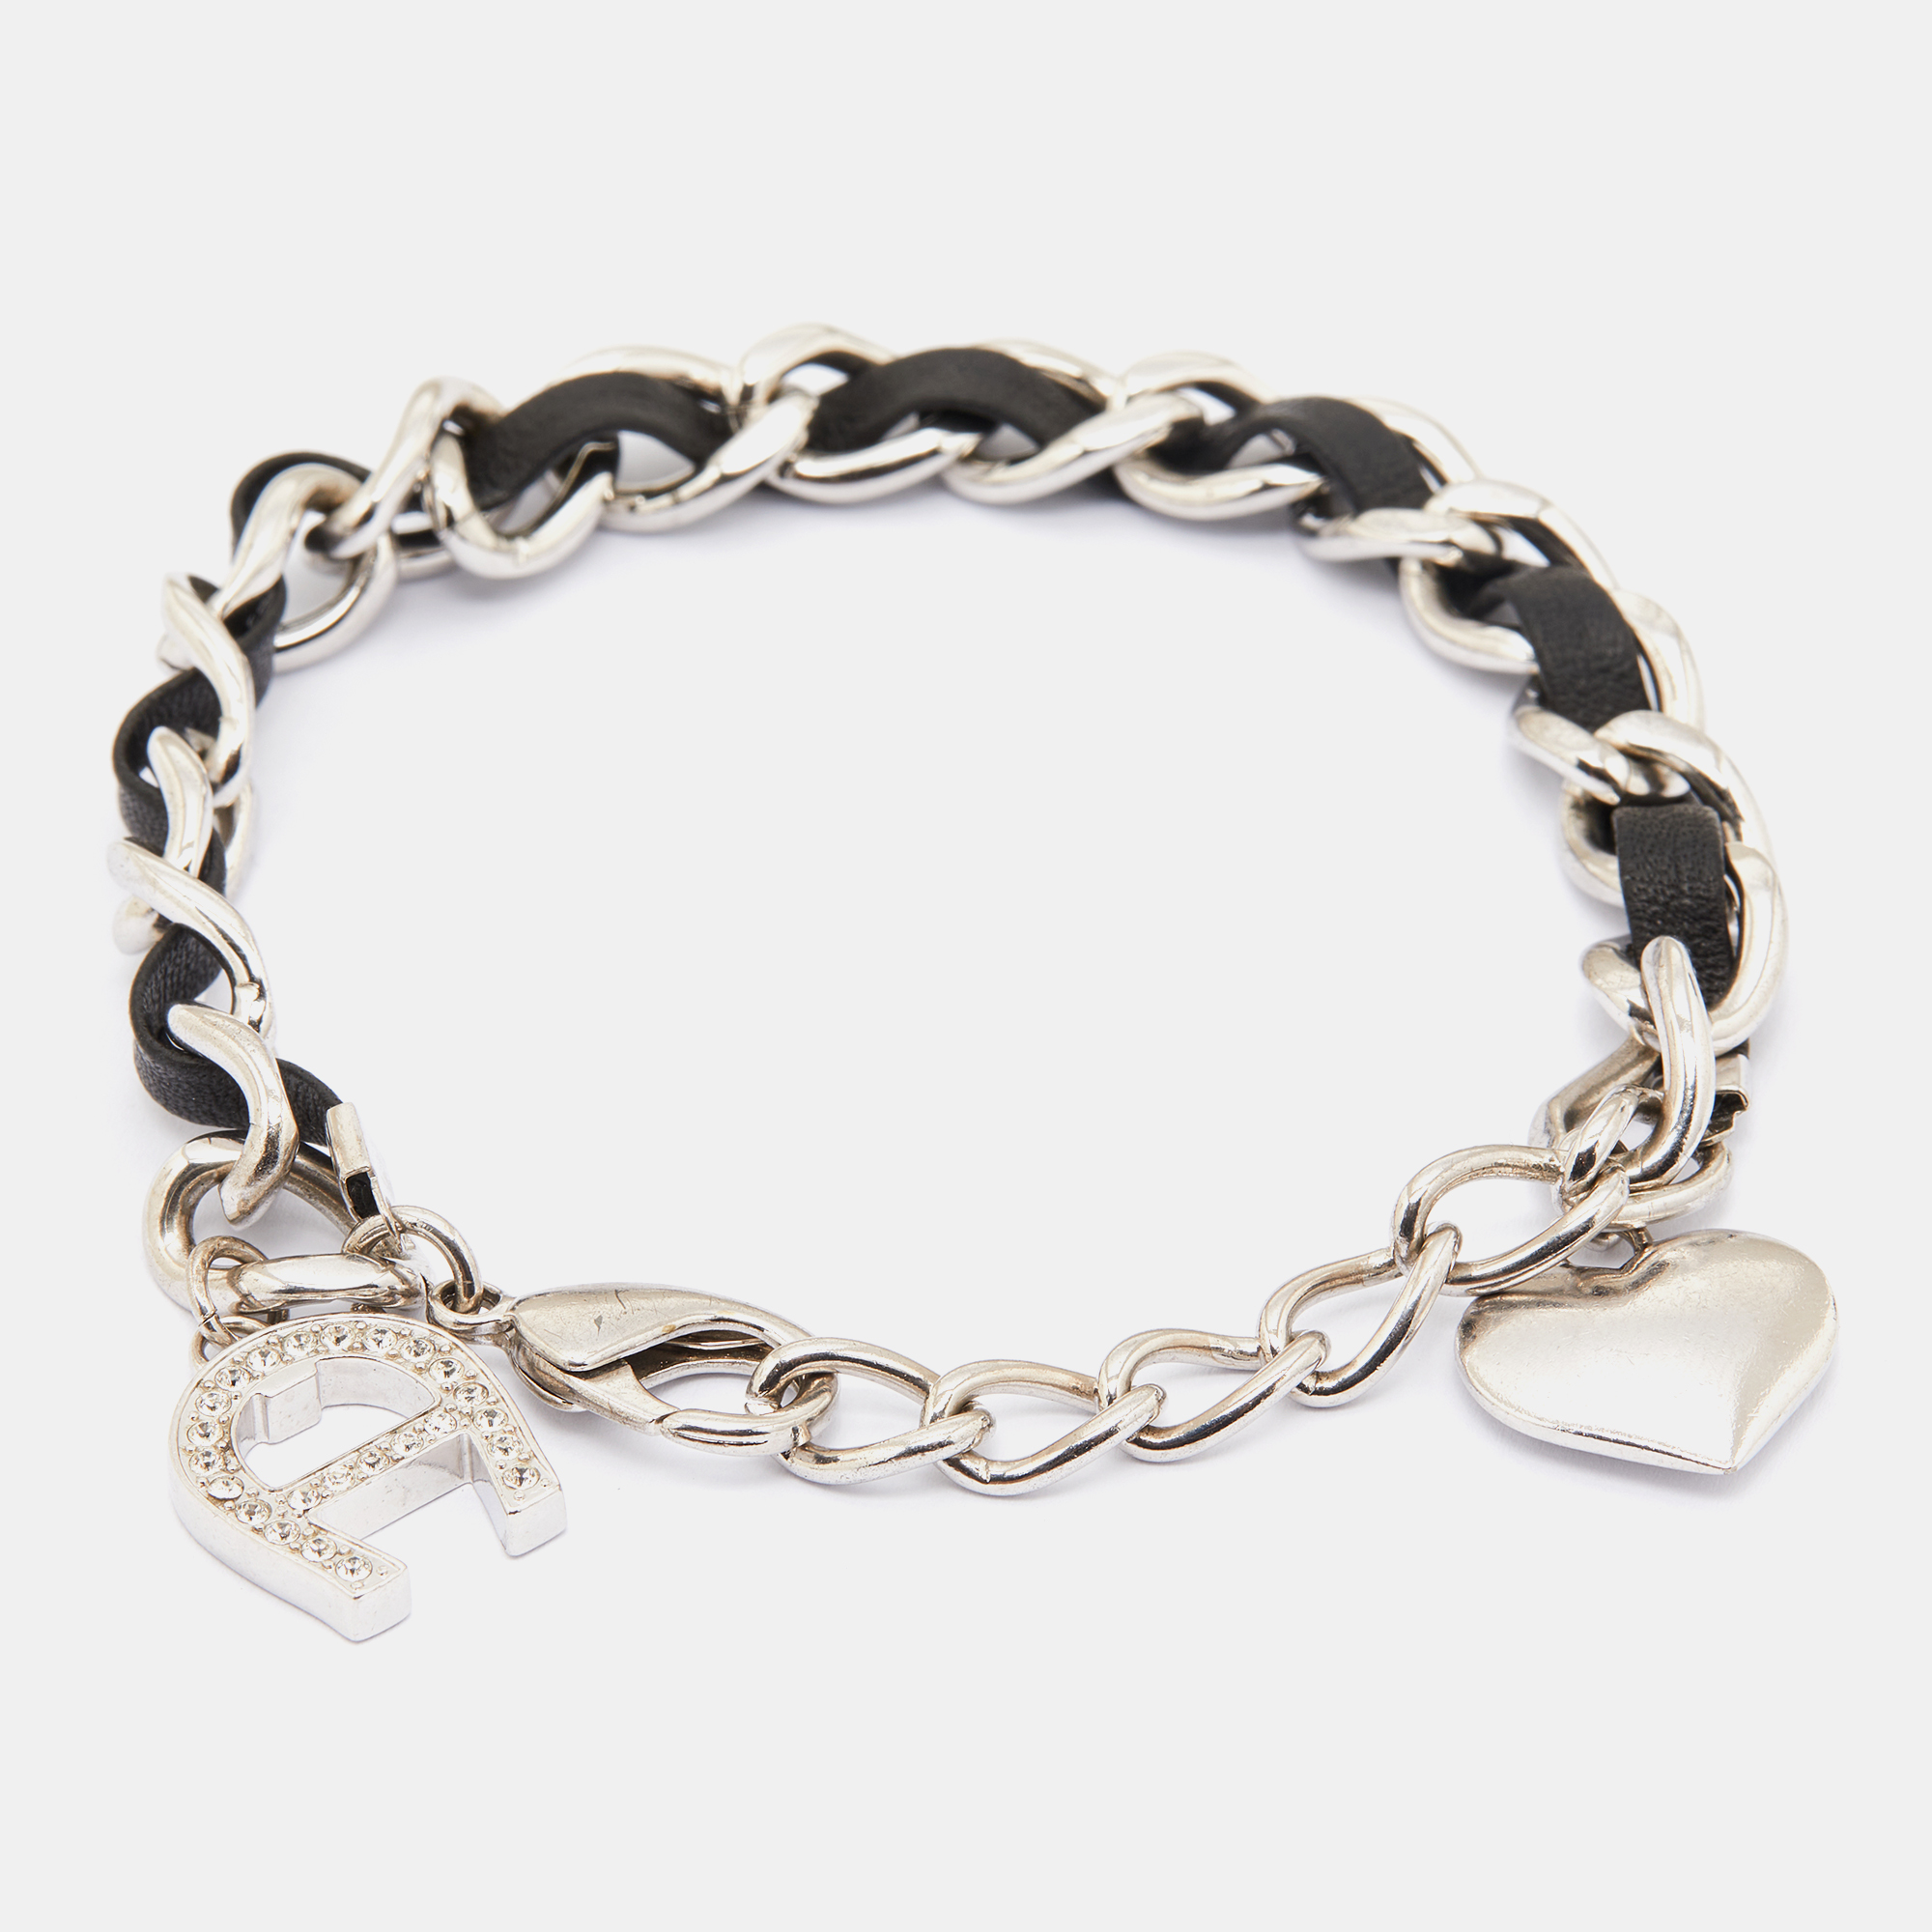 Pre-owned Aigner Black Leather & Silver Tone Metal Chain Bracelet